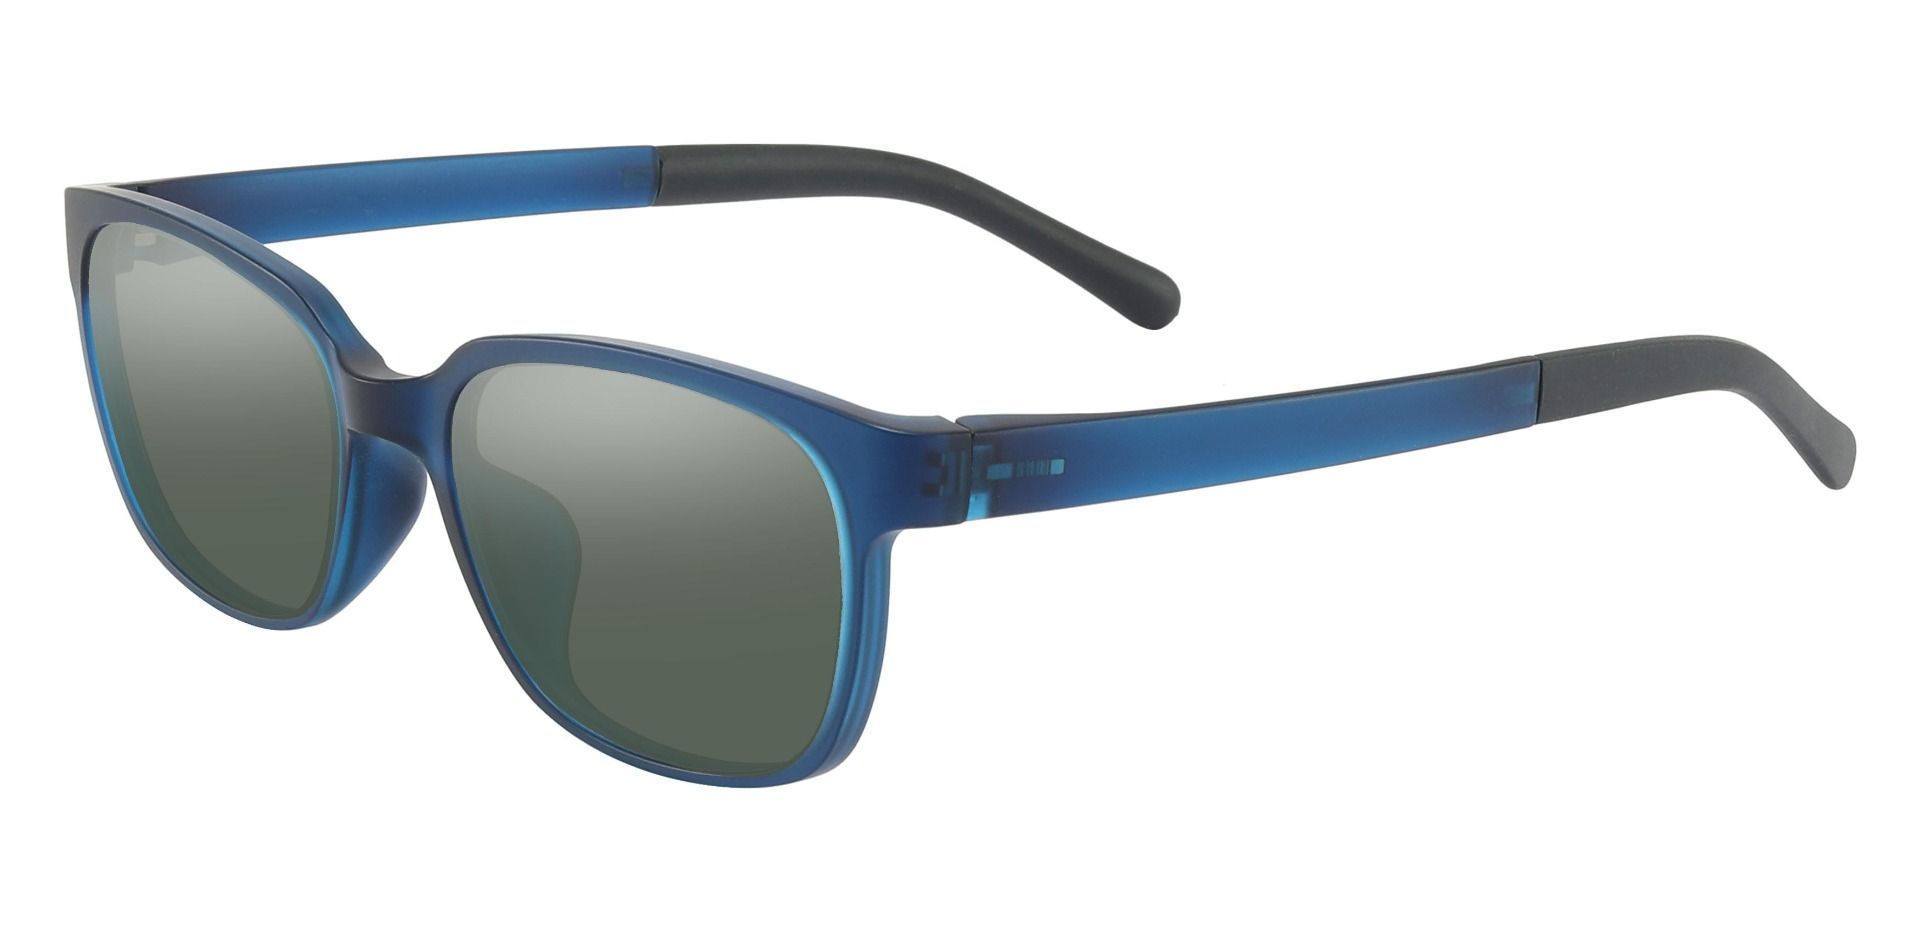 Orchard Rectangle Non-Rx Sunglasses - Blue Frame With Green Lenses